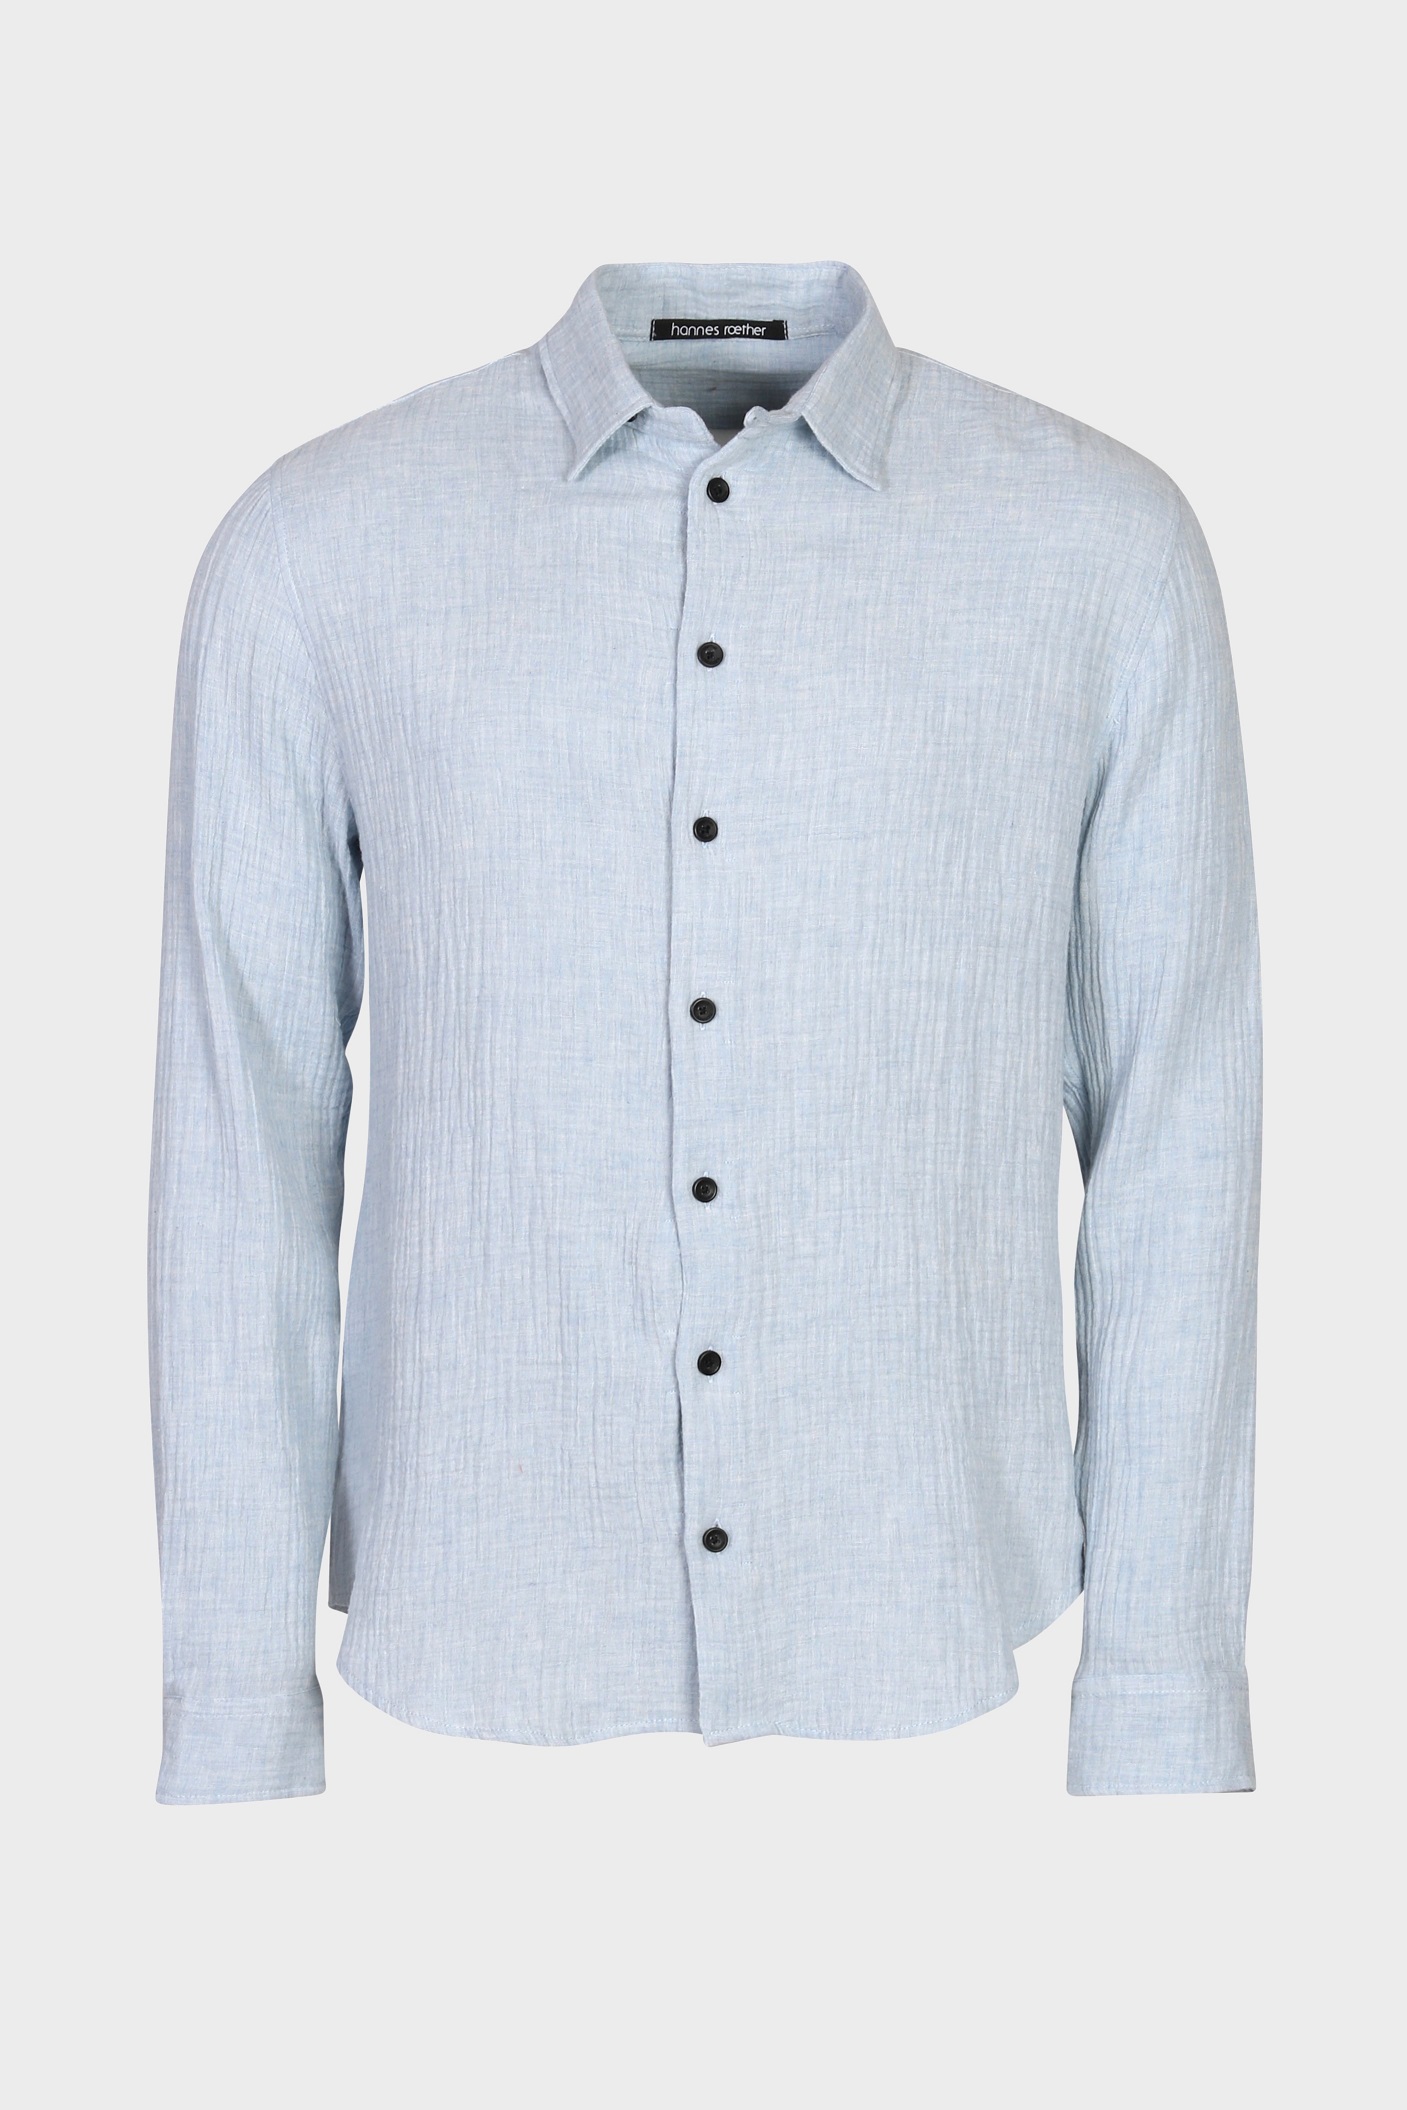 HANNES ROETHER Mousseline Shirt in Light Blue L